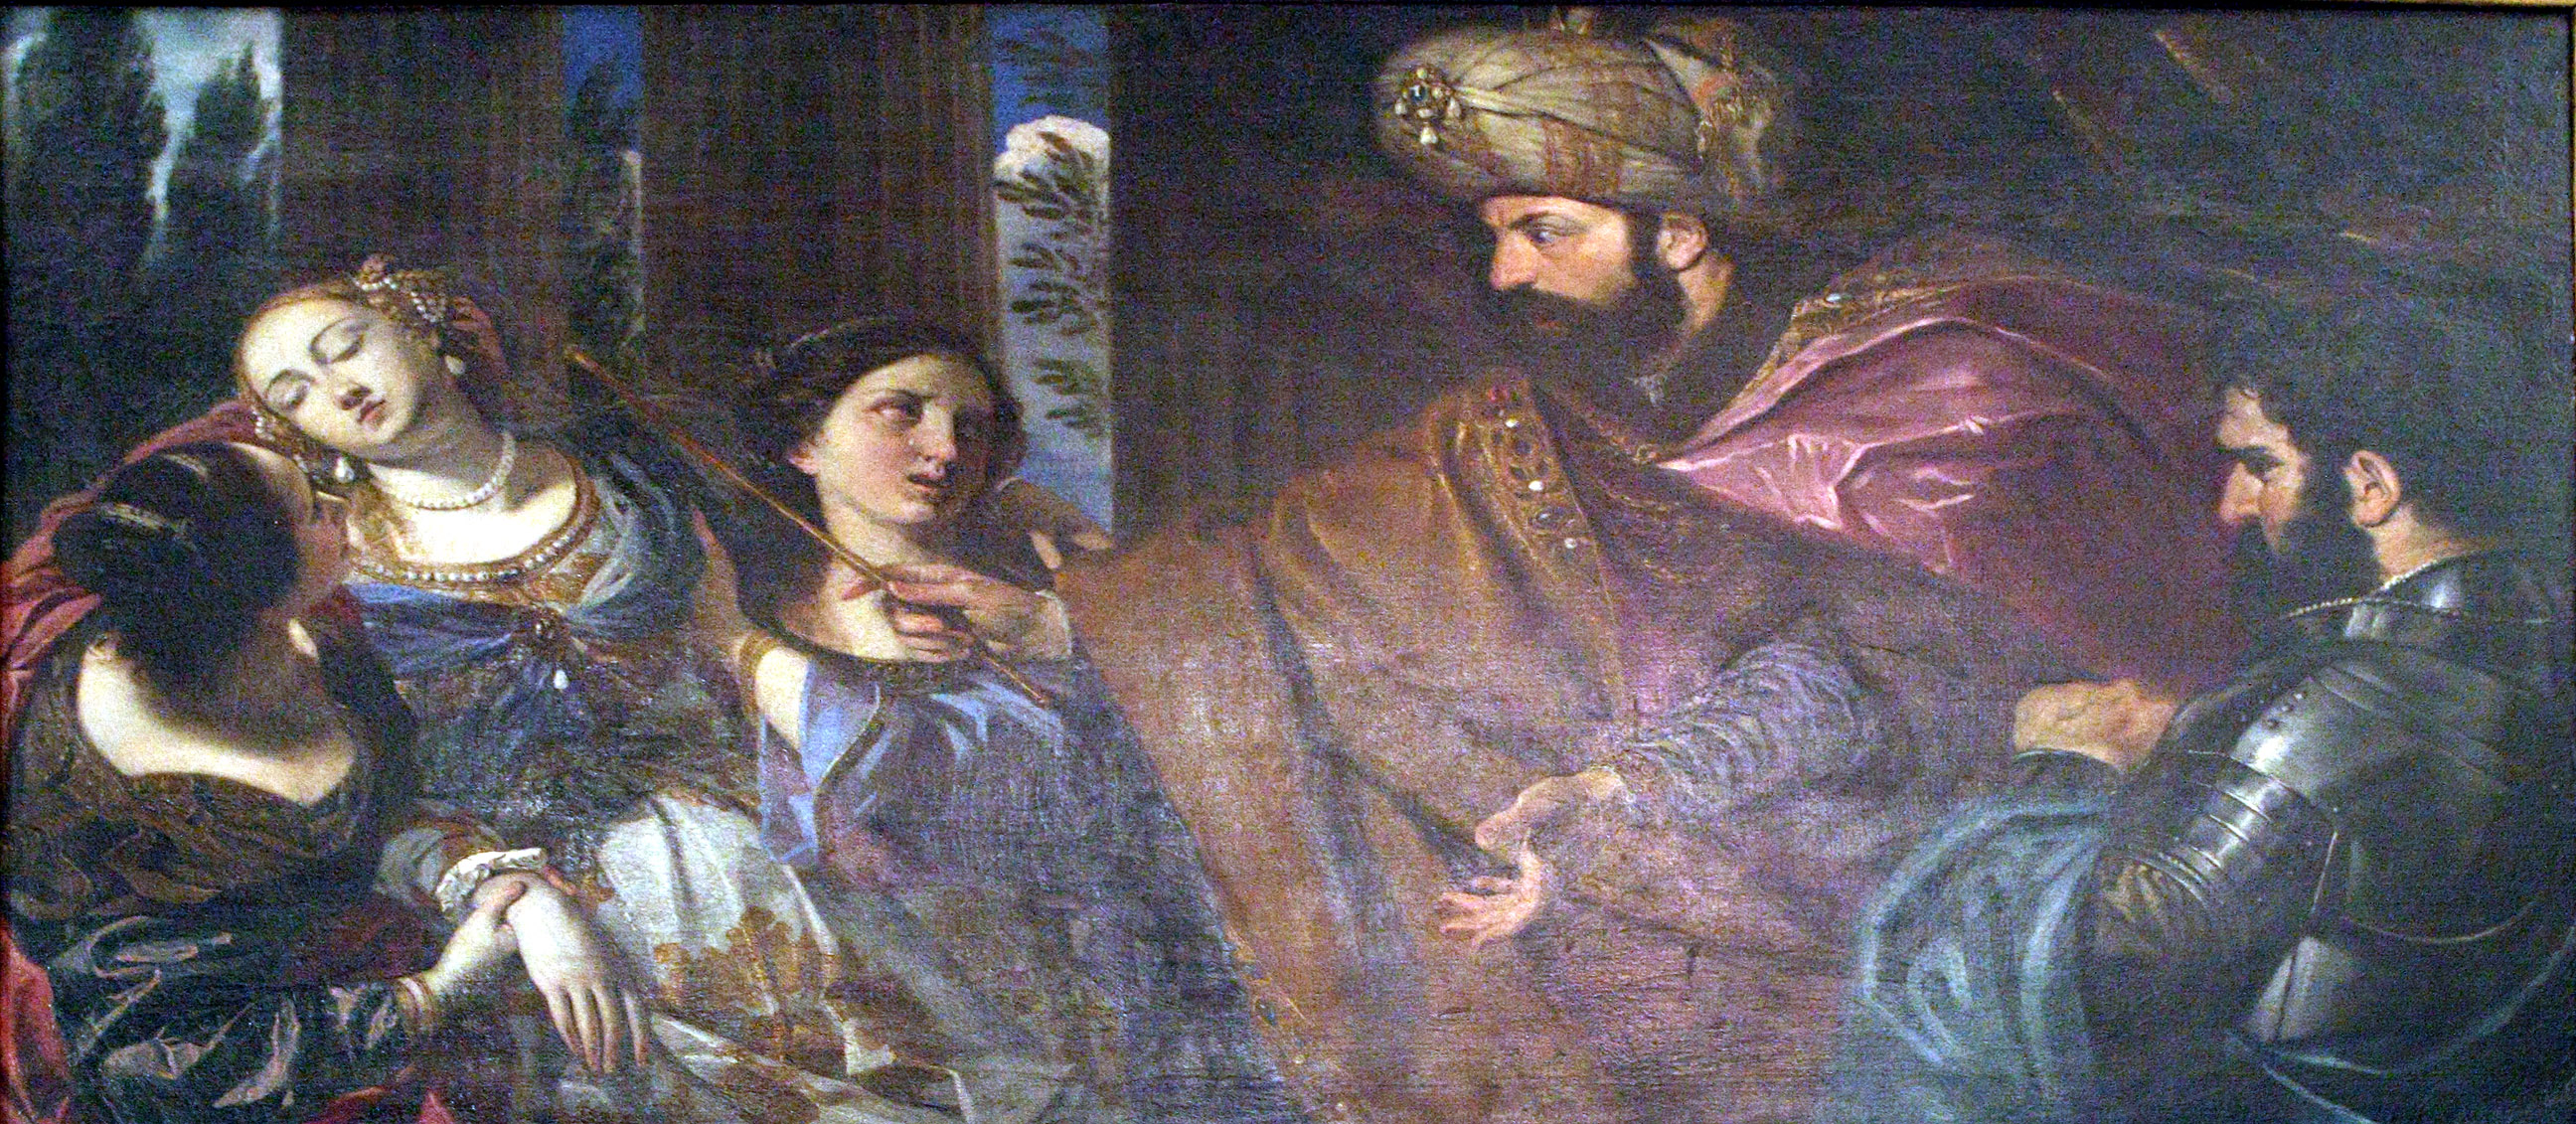 Esther and Adasuerus, This work deals with the main eposode from the book of Esther from the Old Testiment- the woman, one of King Ahasuerus’s Jewish concubines, faints while pleading for the safety of her people.
